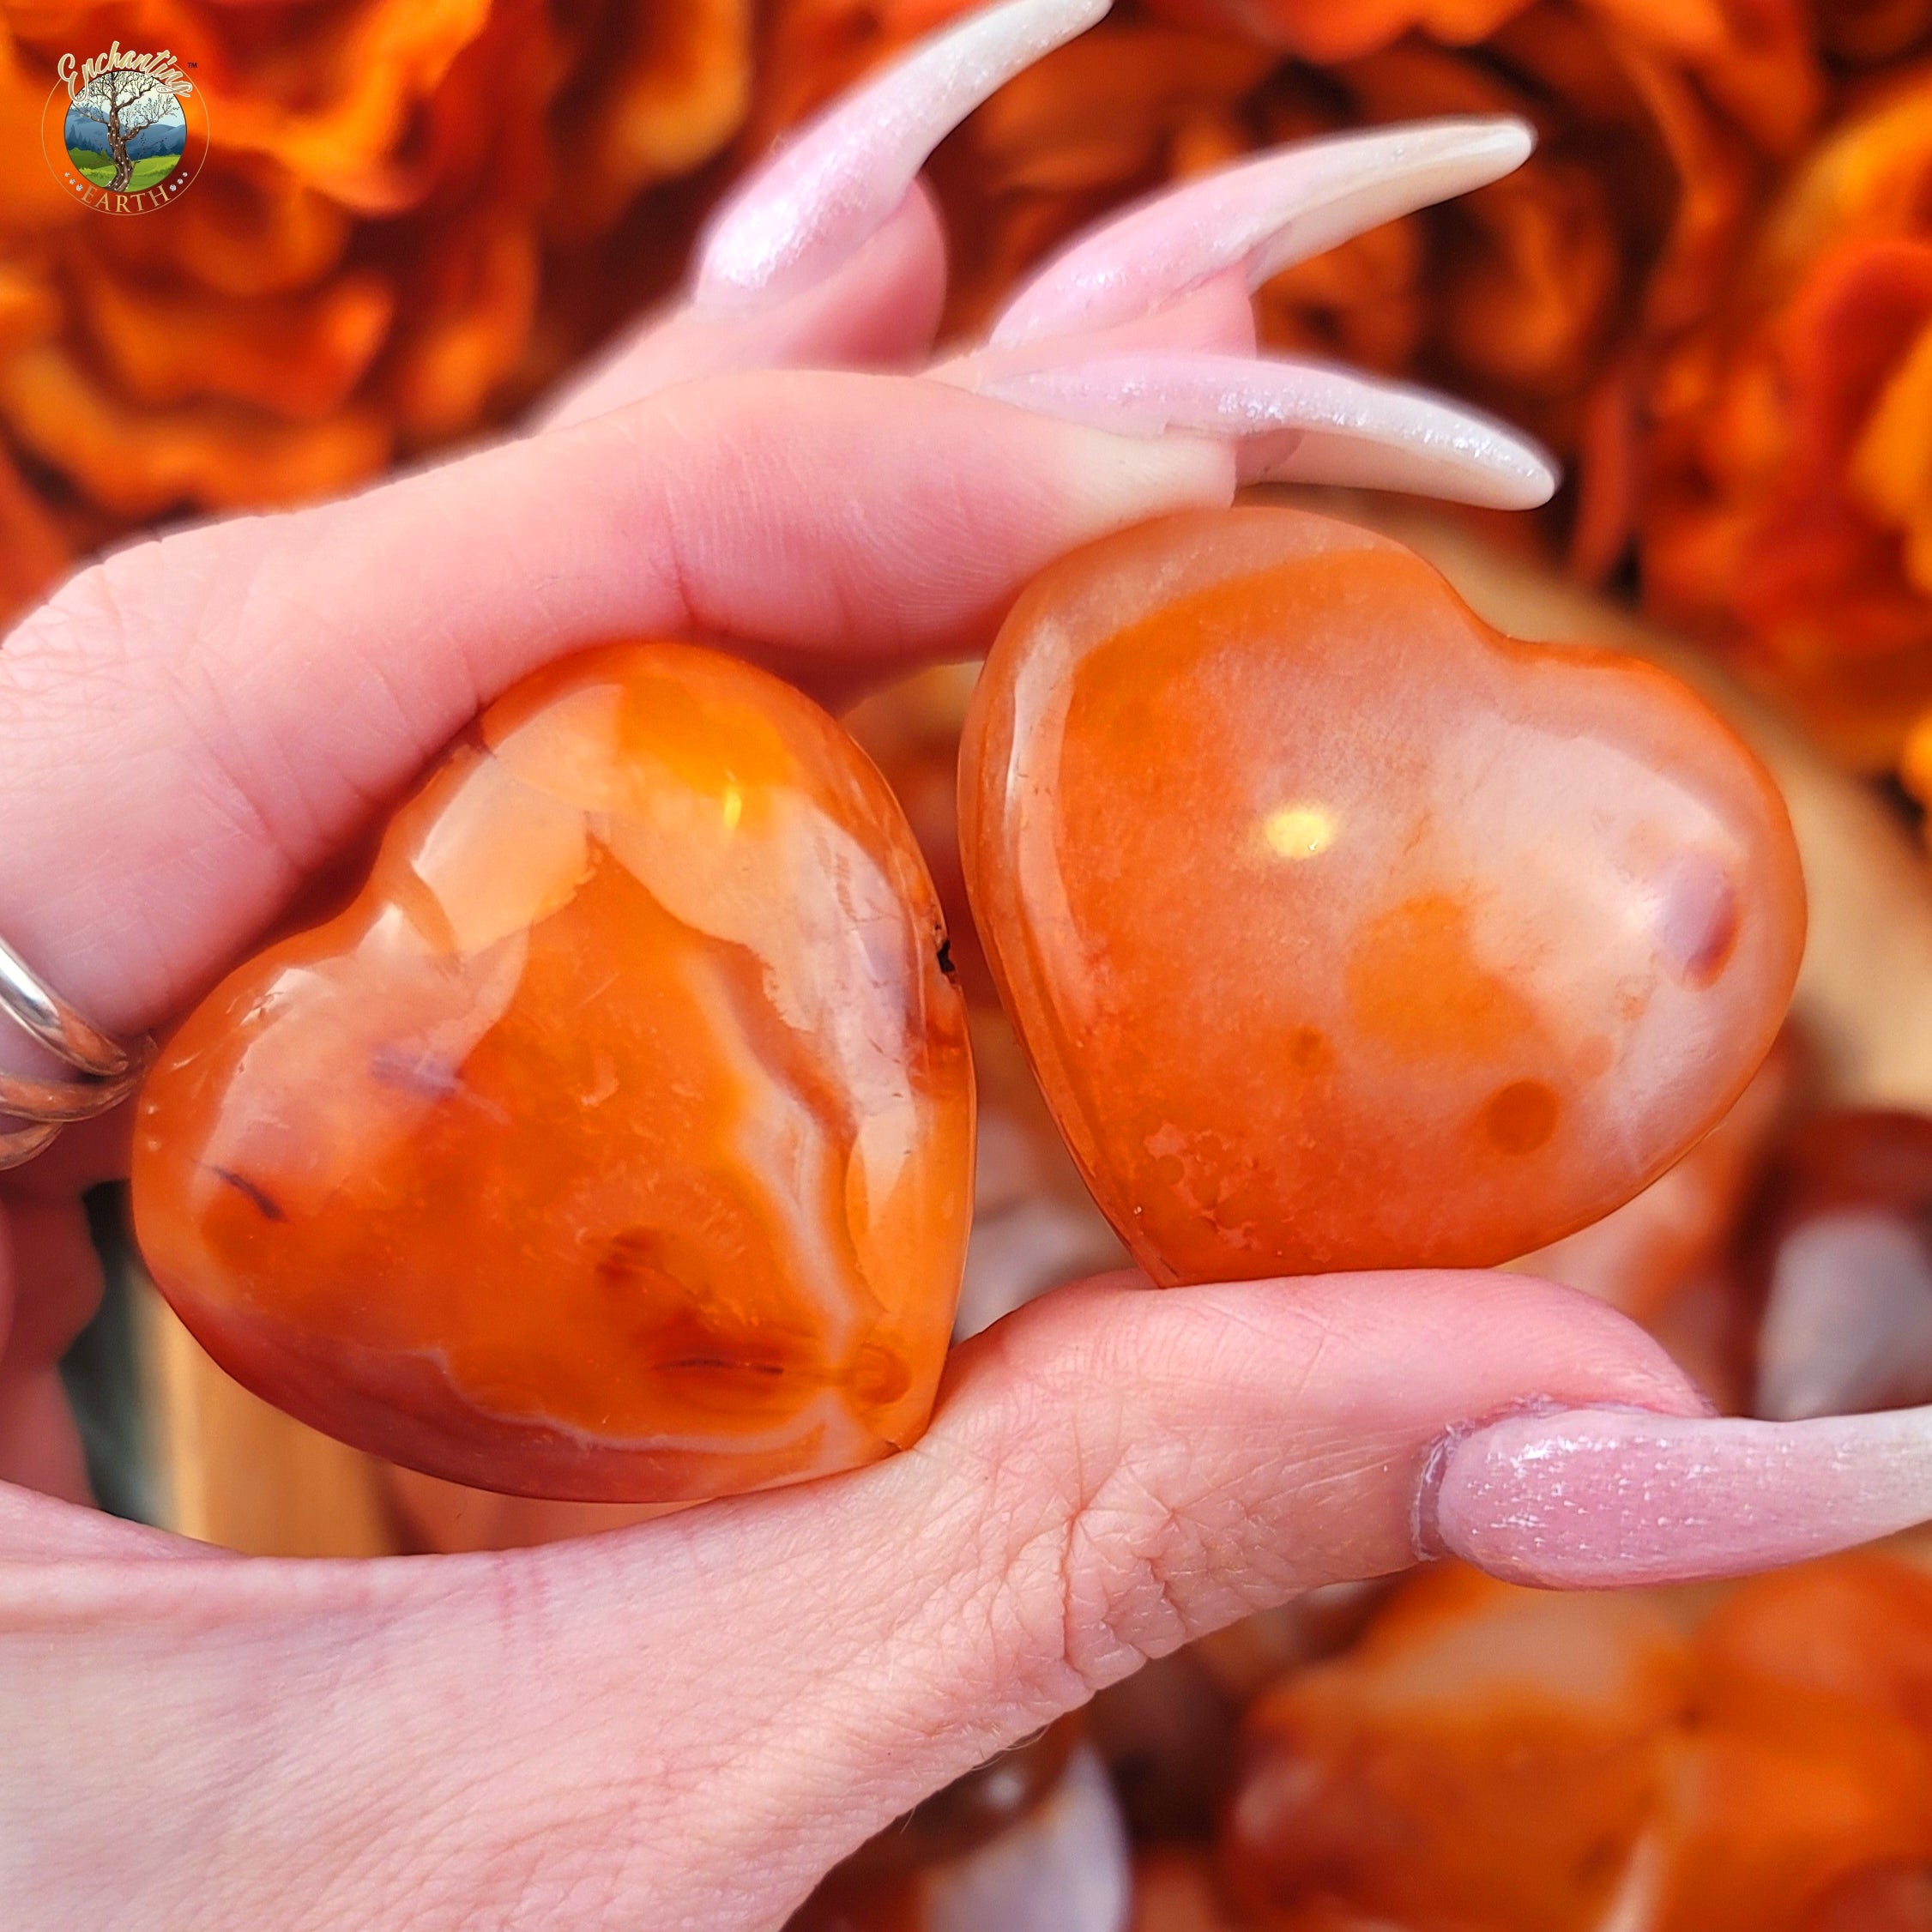 Carnelian Heart for Empowerment and Passion